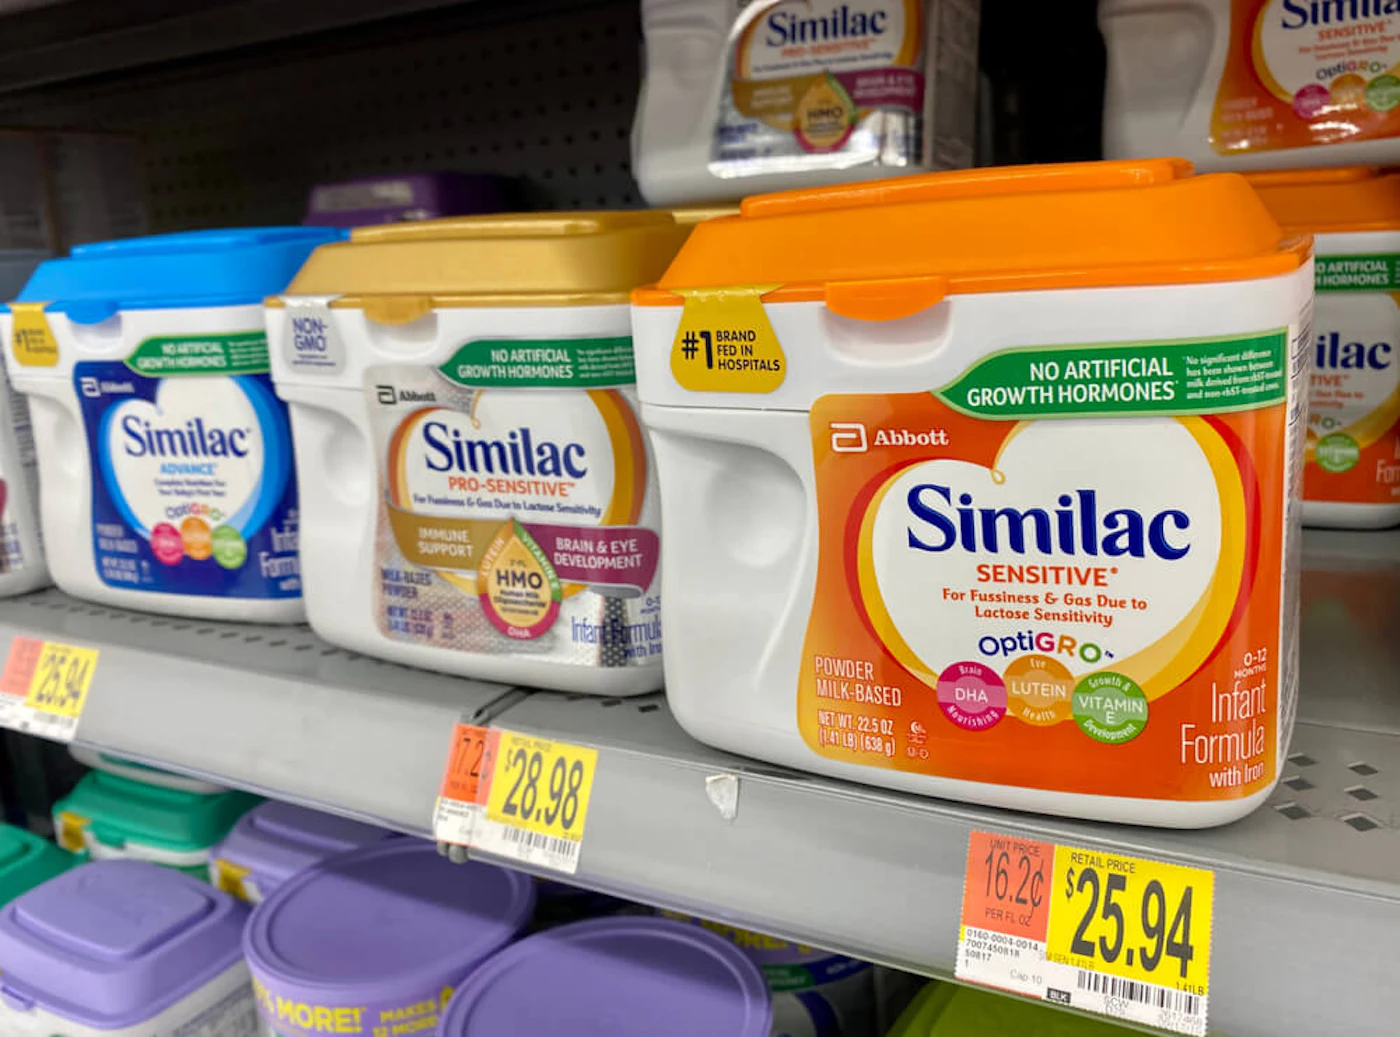 Similac produced at a Michigan facility is under a voluntary recall. (Image via Shutterstock.)